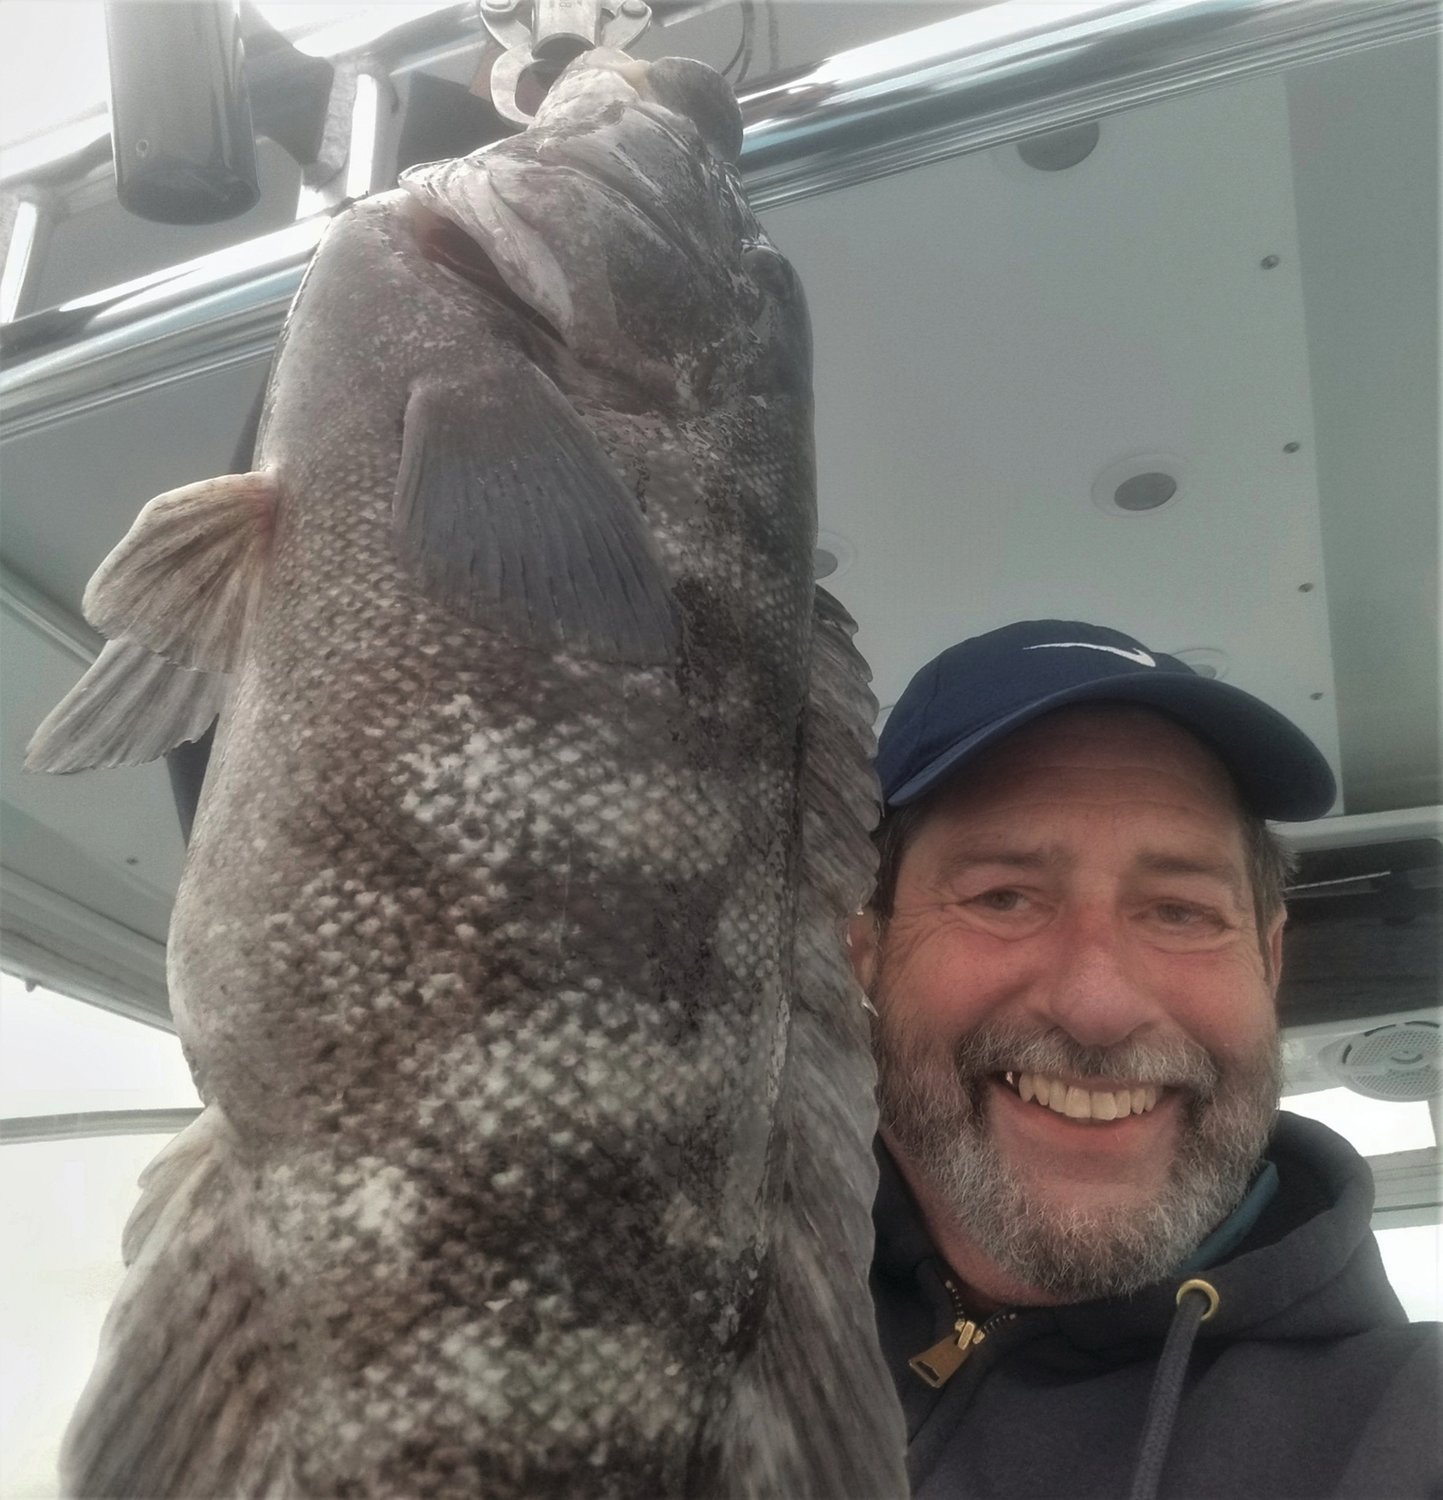 FISHING SHOW SEMINARS: Learn how to catch bluefin tuna to large tautog like this one caught off North Kingstown by Capt. Dave Monti. The New England Saltwater Fishing Show is March 11 to 13. (Submitted photo)